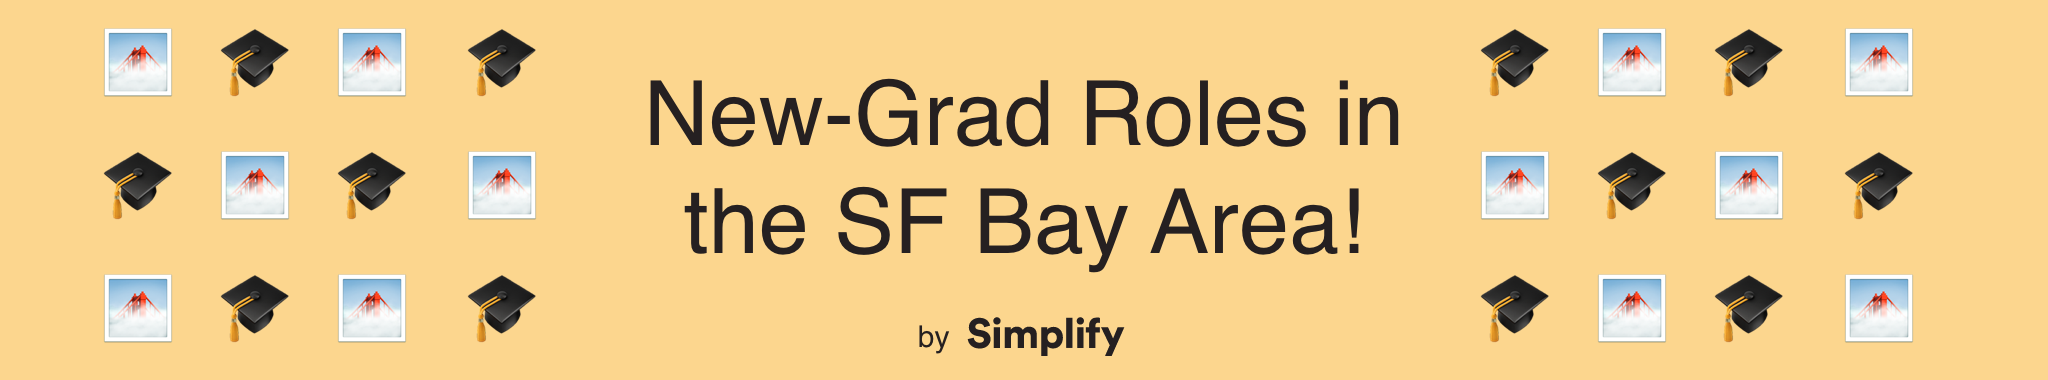 text that says “New Grad Roles in the SF Bay Area!” surrounded by golden gate bridge and graduation cap emojis